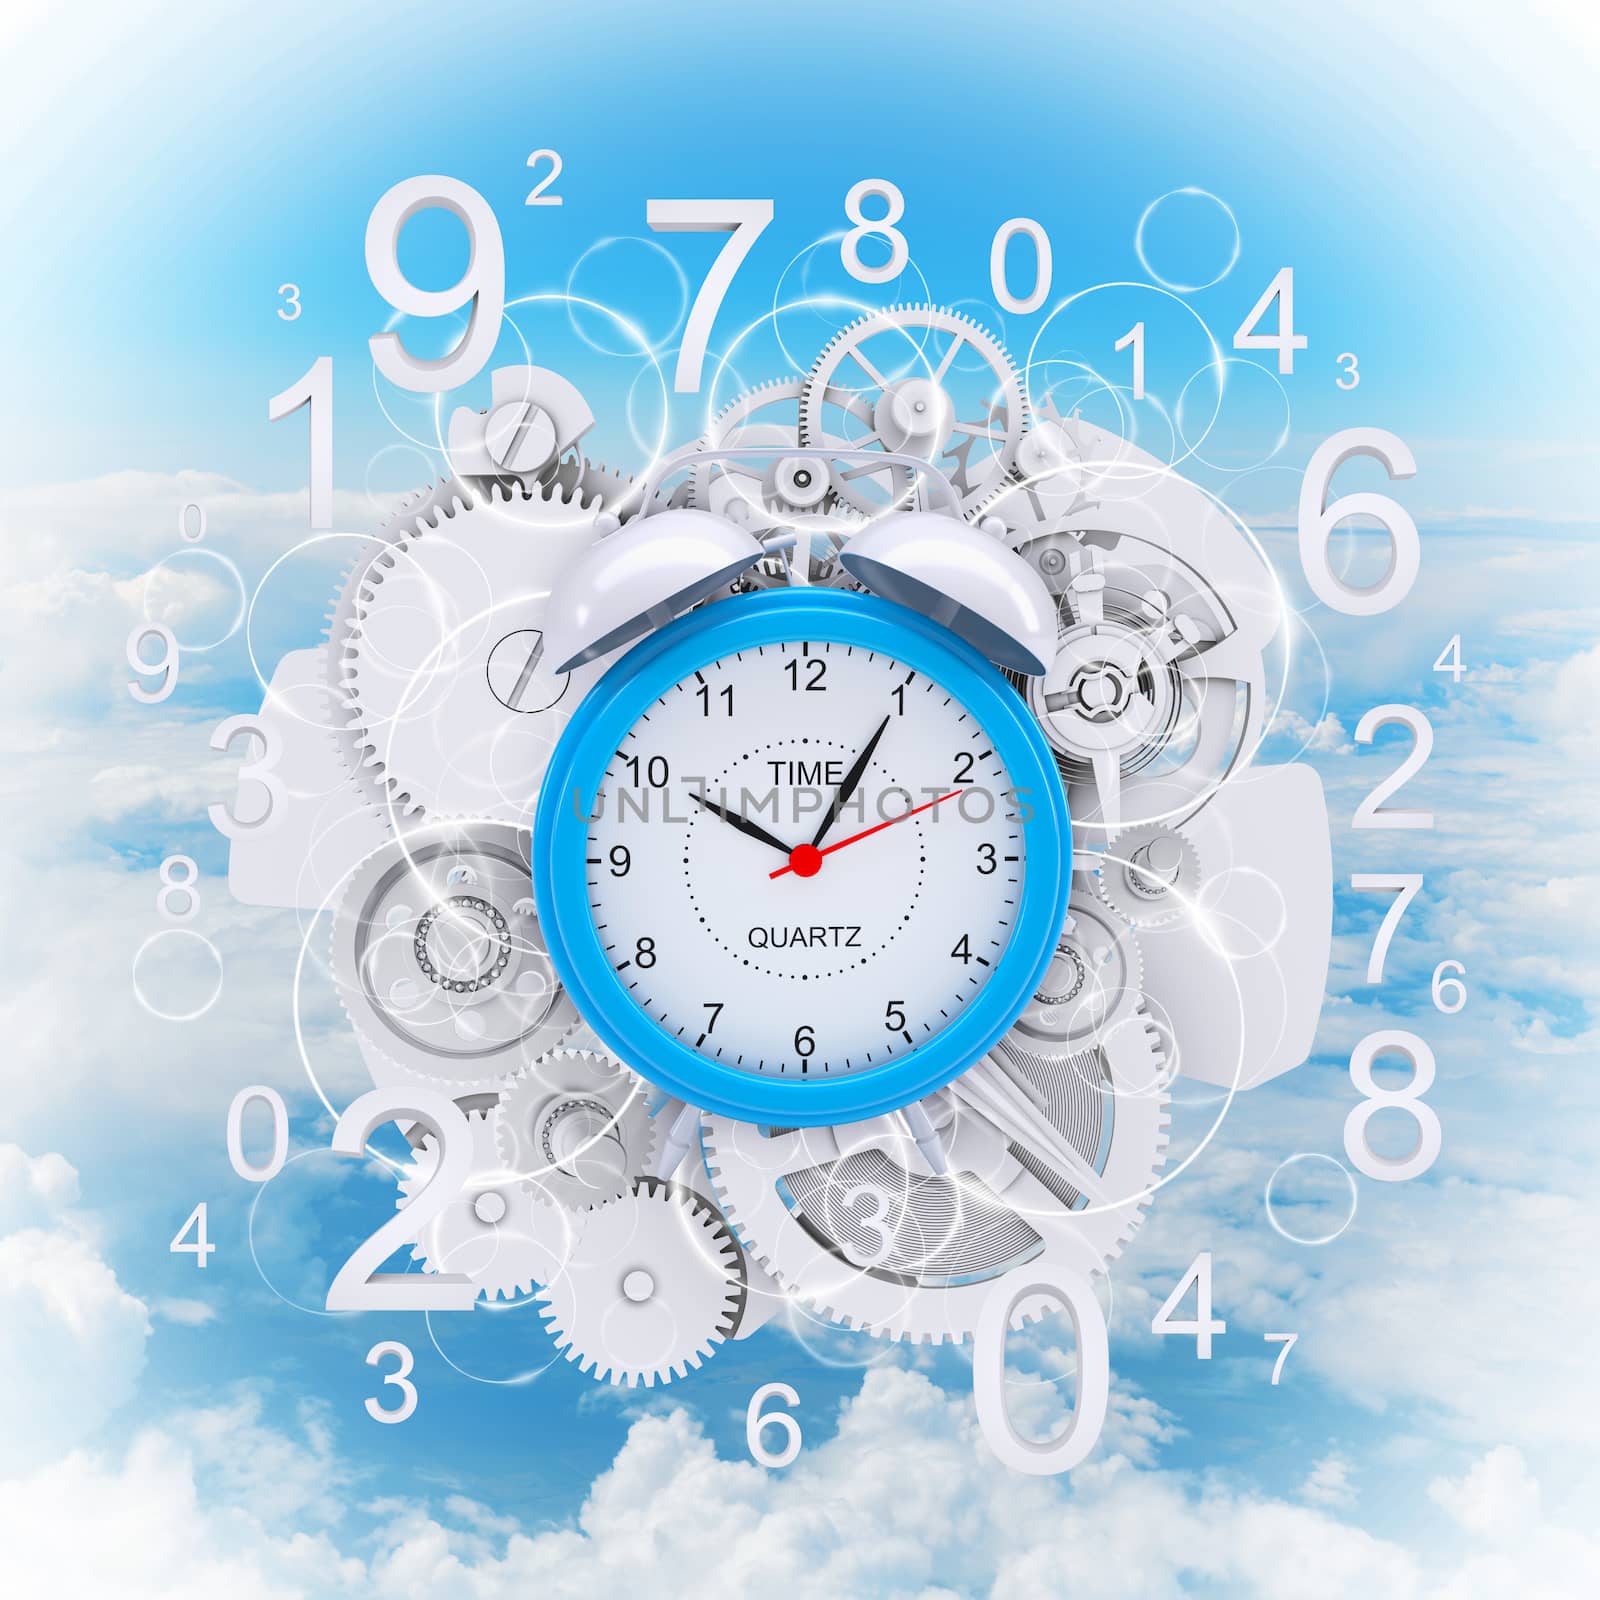 Alarm clock with figures and white gears. Sky background